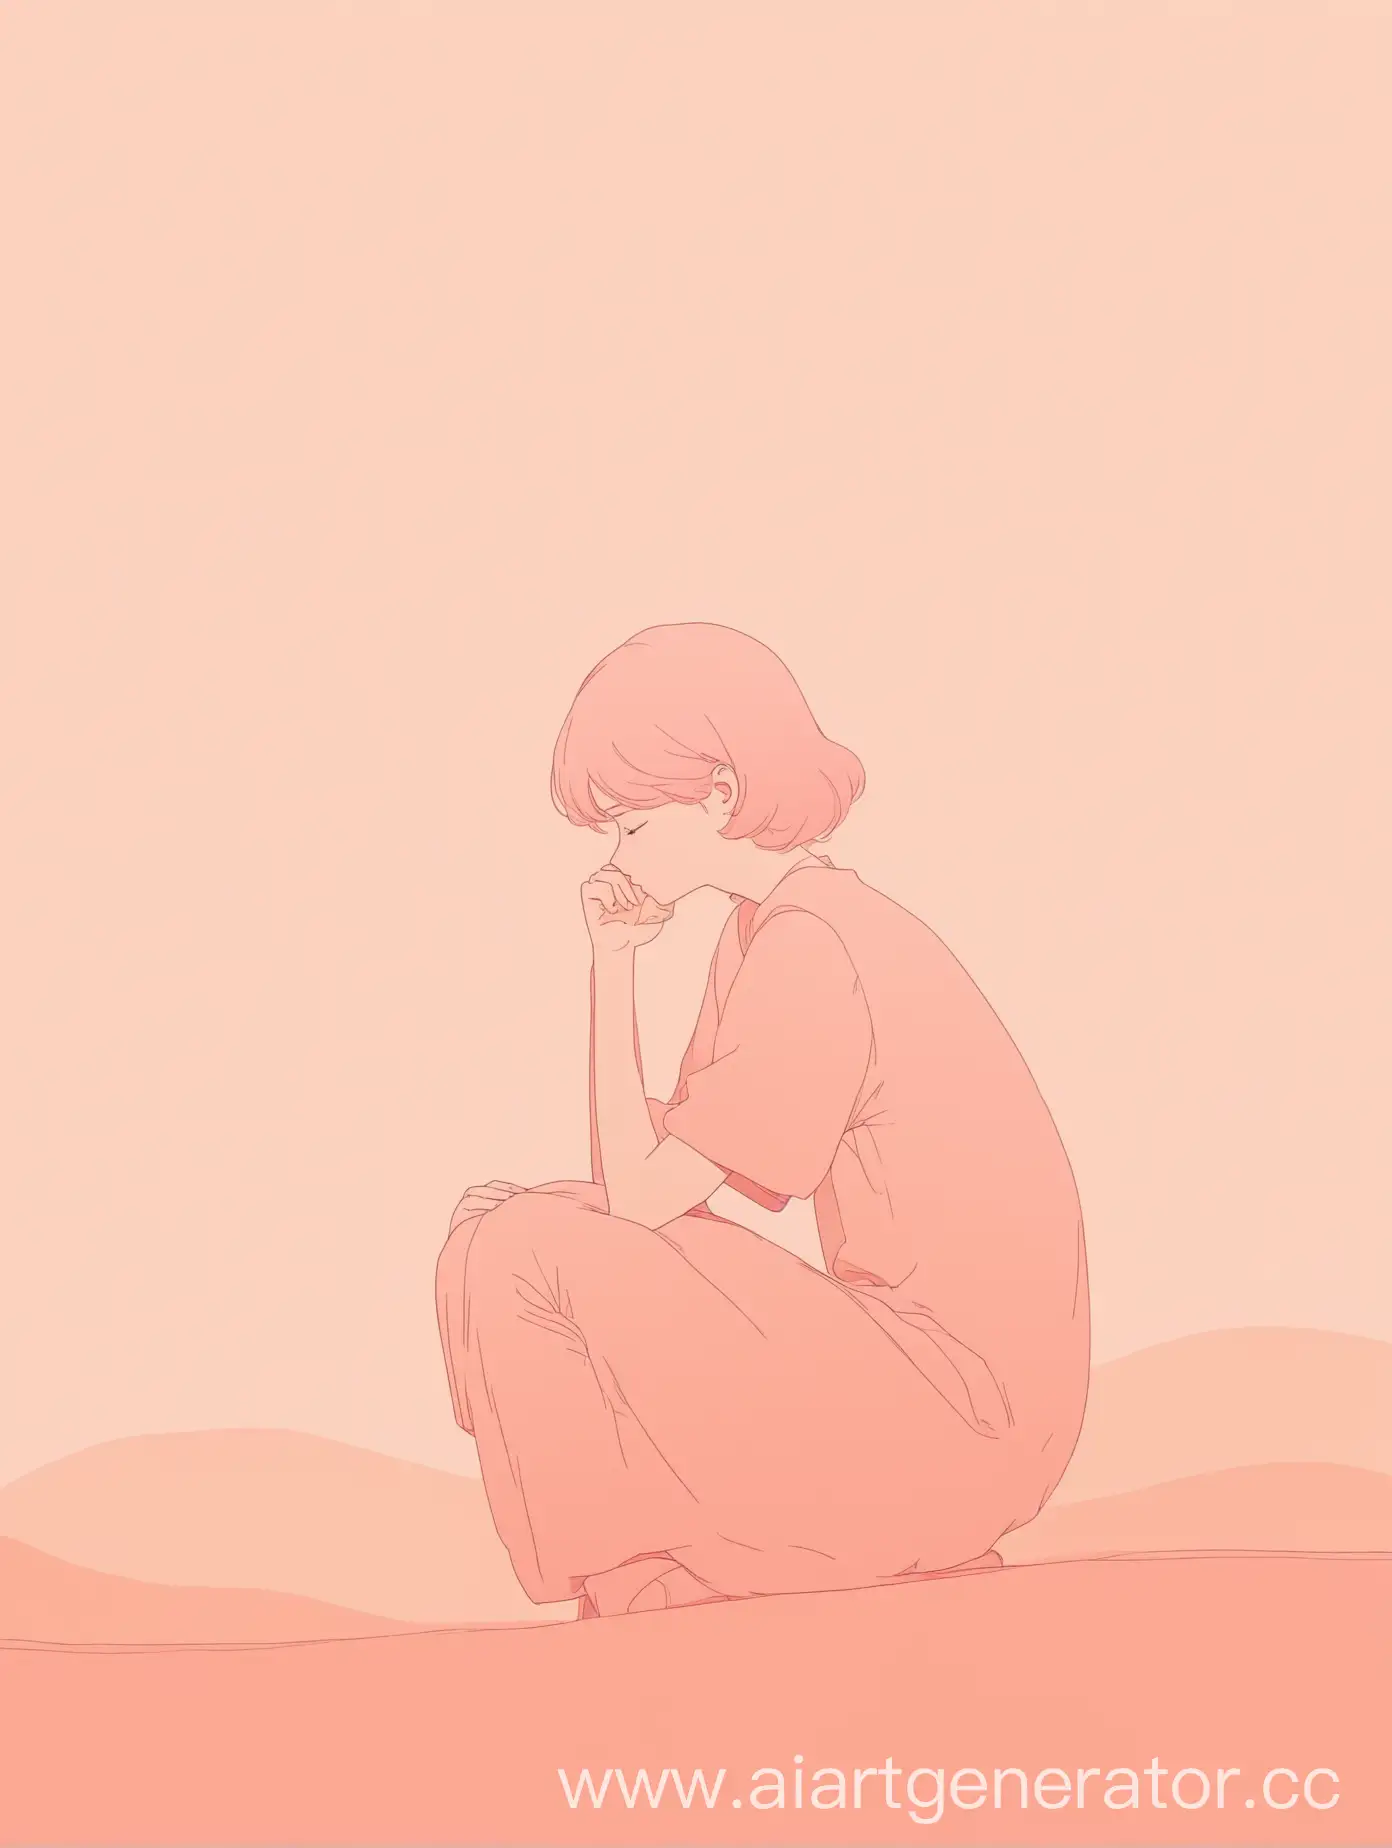 Minimalistic-Deep-Thought-Contemplative-Figure-in-Soft-Pink-and-Peach-Tones